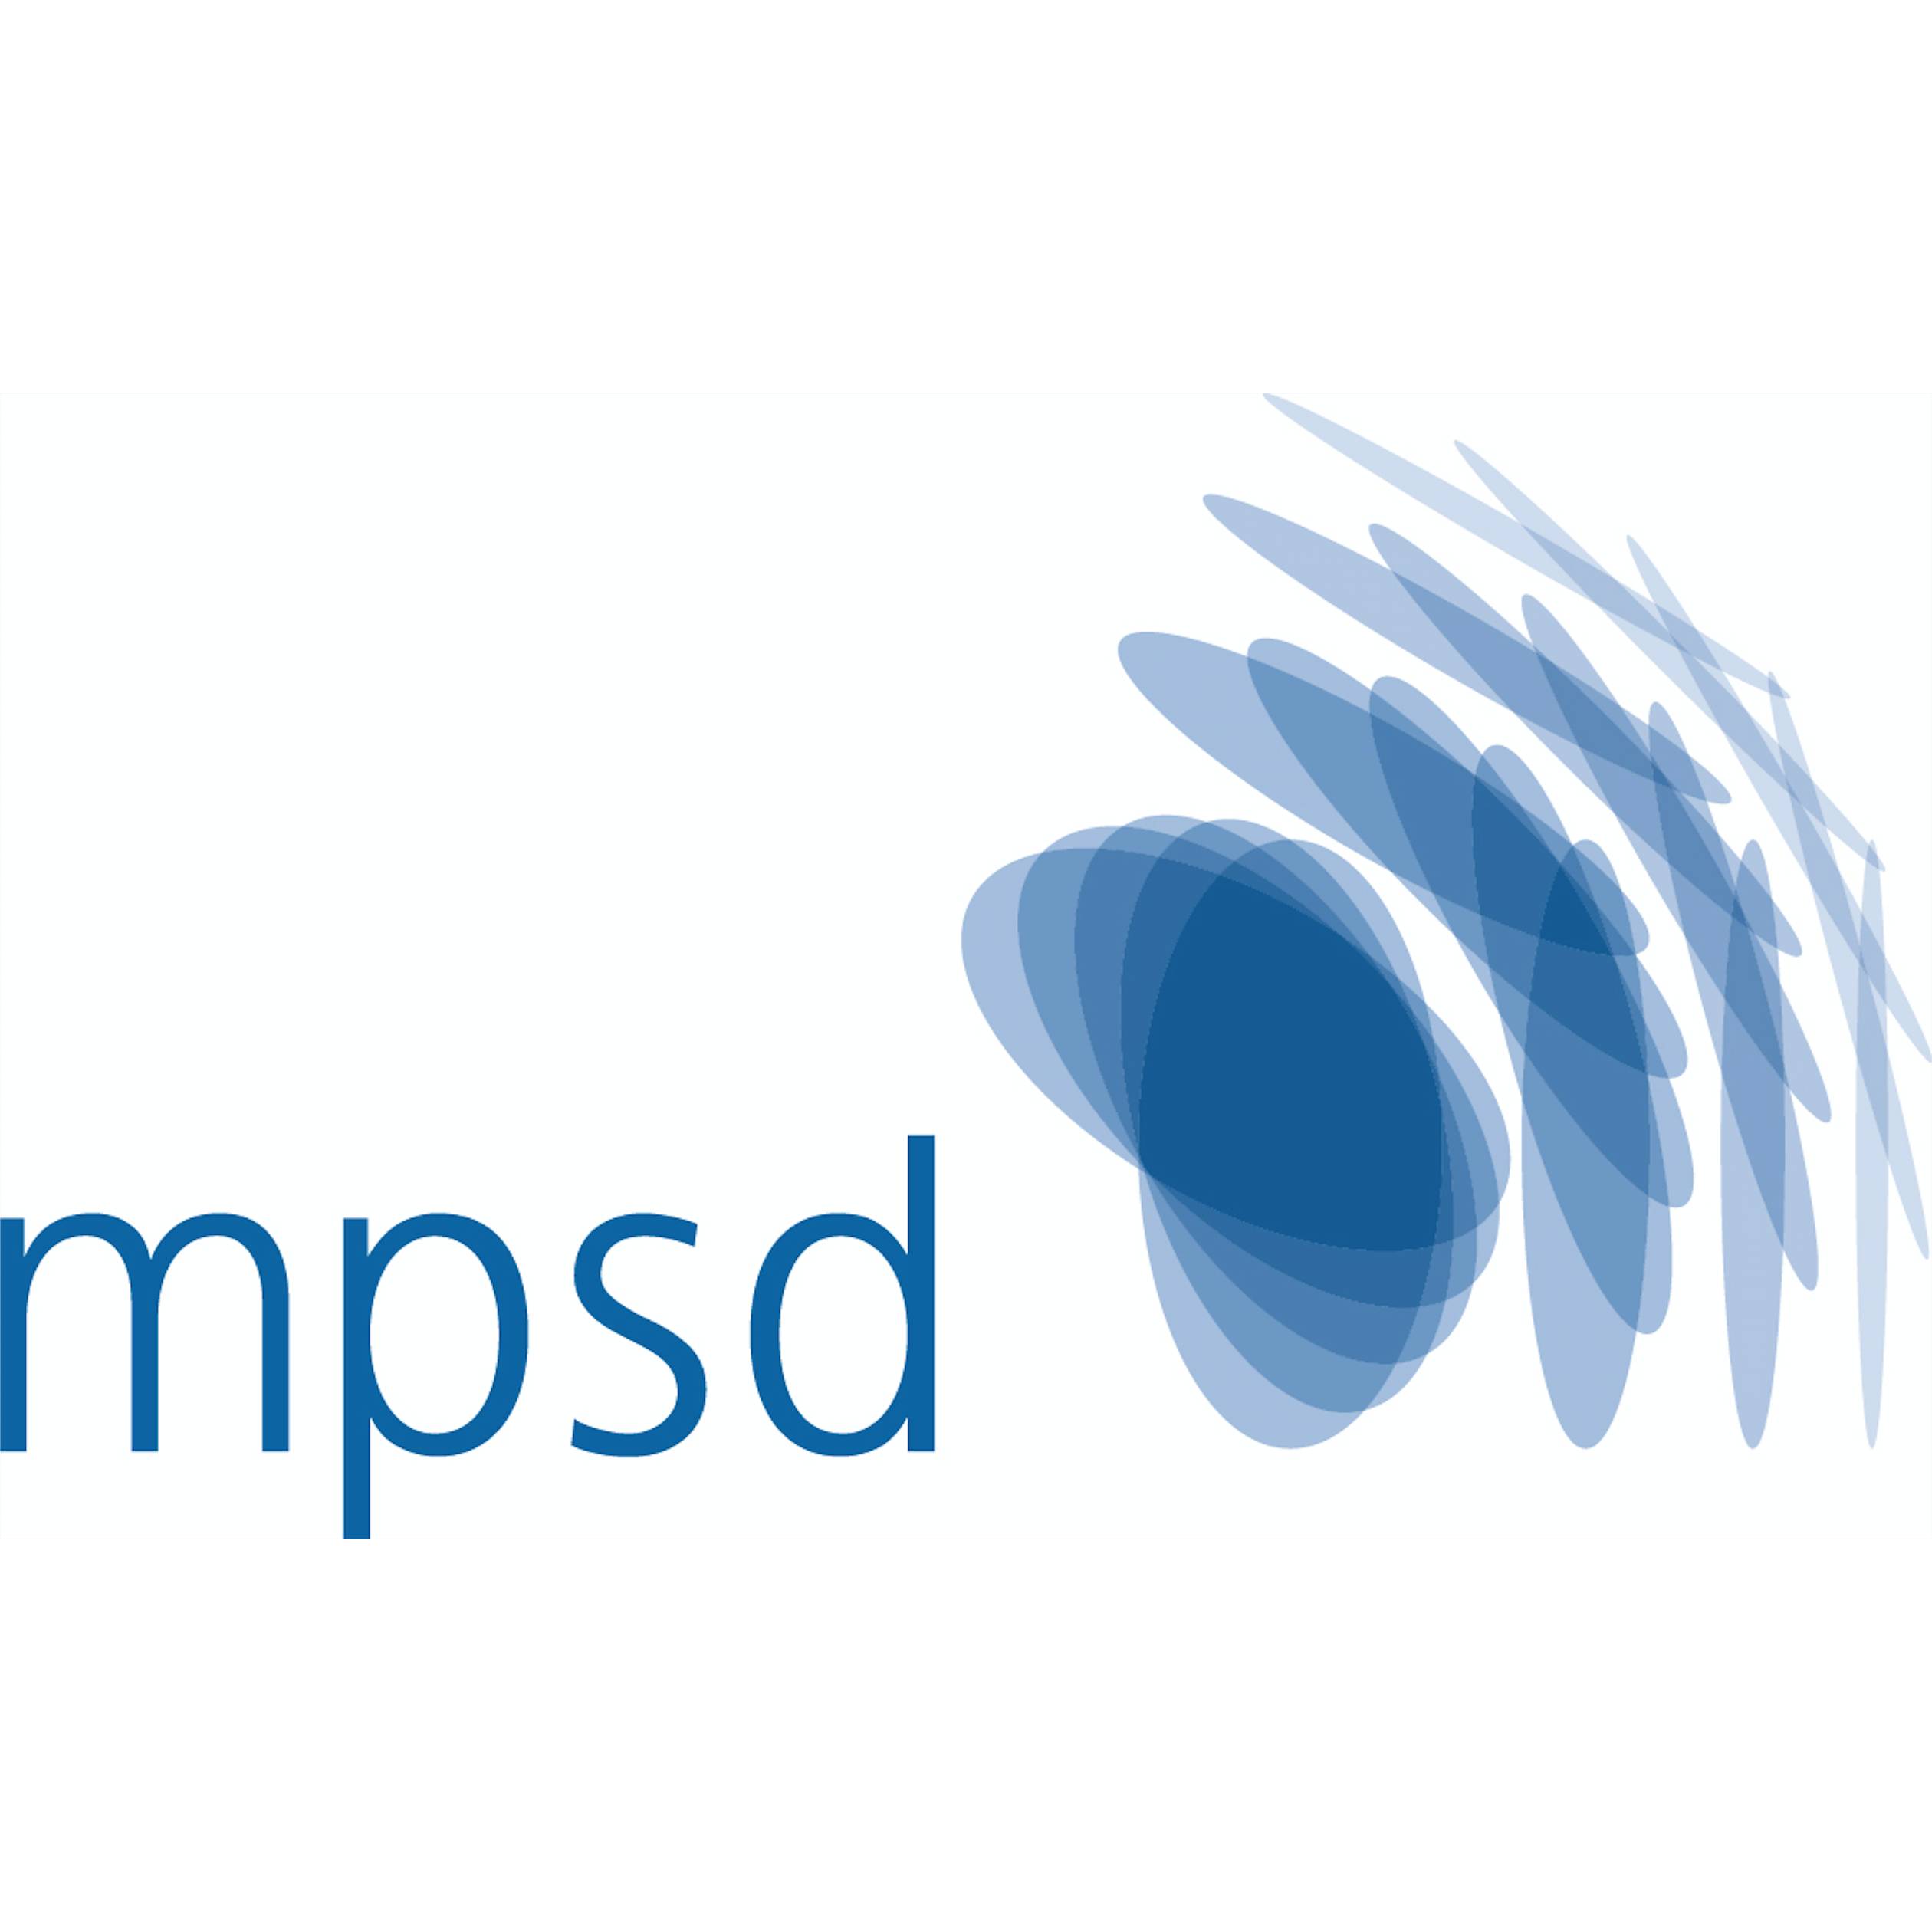 images/04_Institute/logo-mpsd-icon-and-mpsd.jpg#joomlaImage://local-images/04_Institute/logo-mpsd-icon-and-mpsd.jpg?width=2520&height=2520